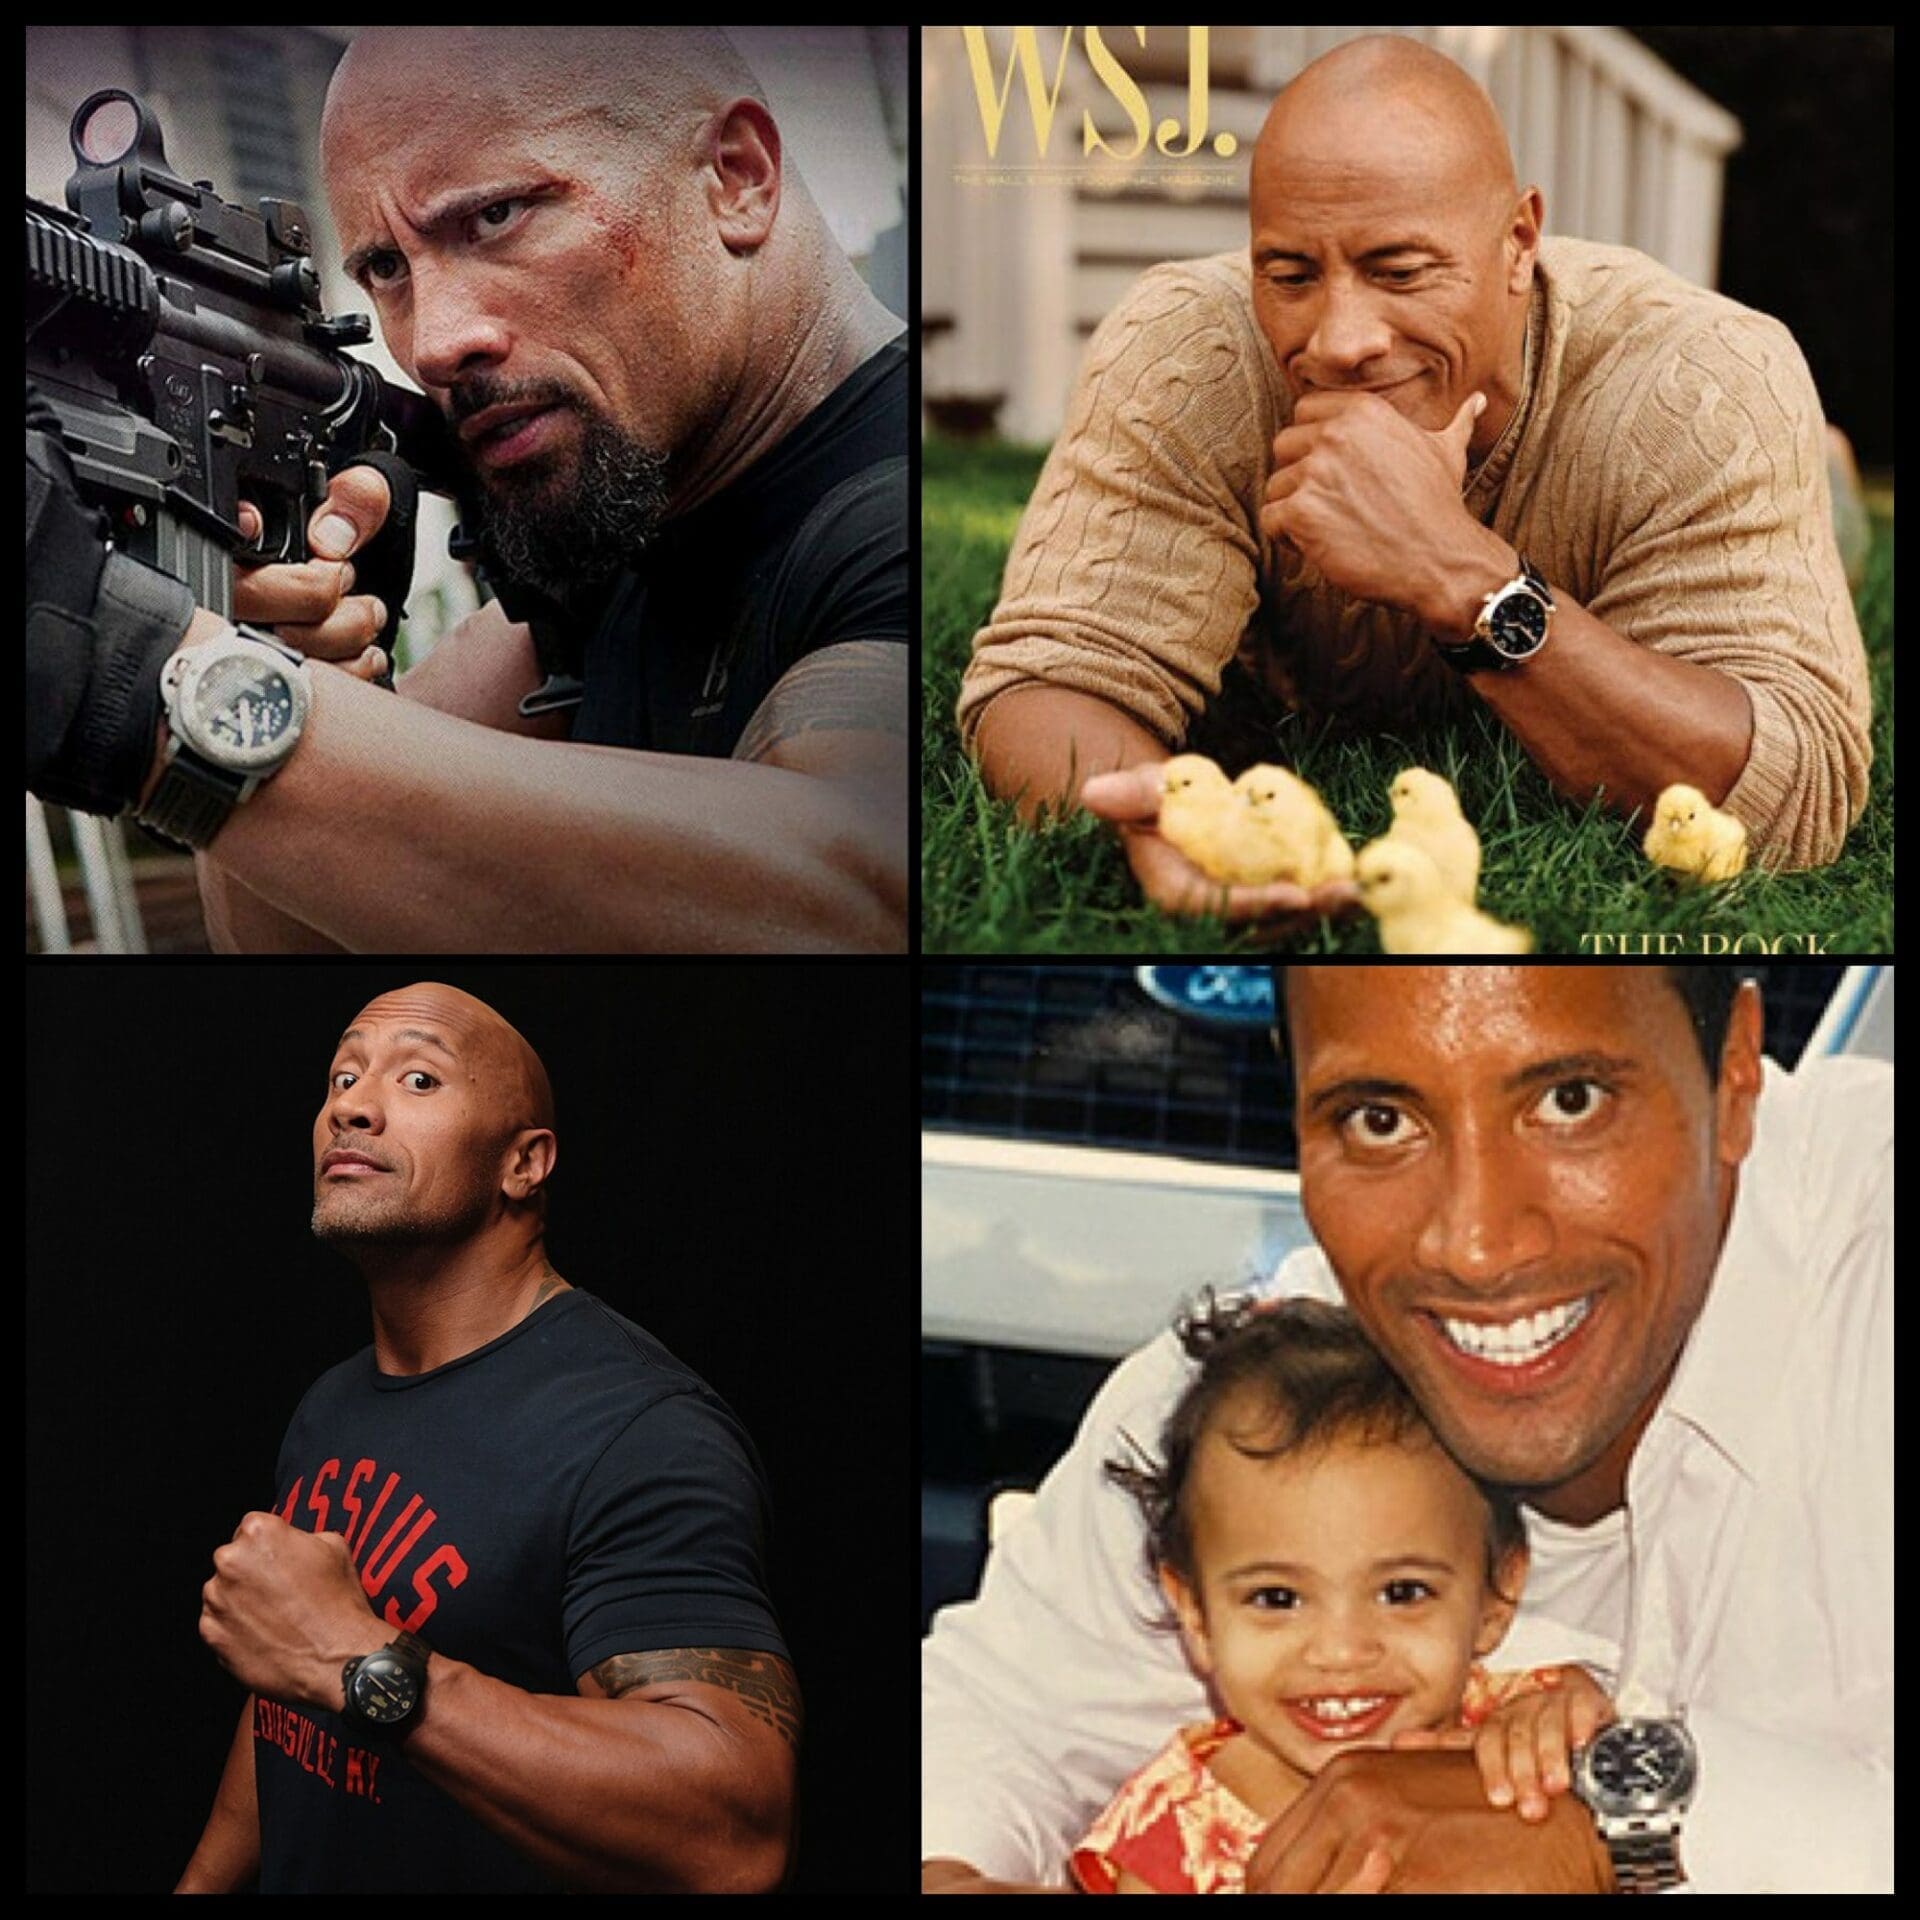 Panerai CEO reveals why Dwayne ‘The Rock’ Johnson is such a die-hard fan of the brand